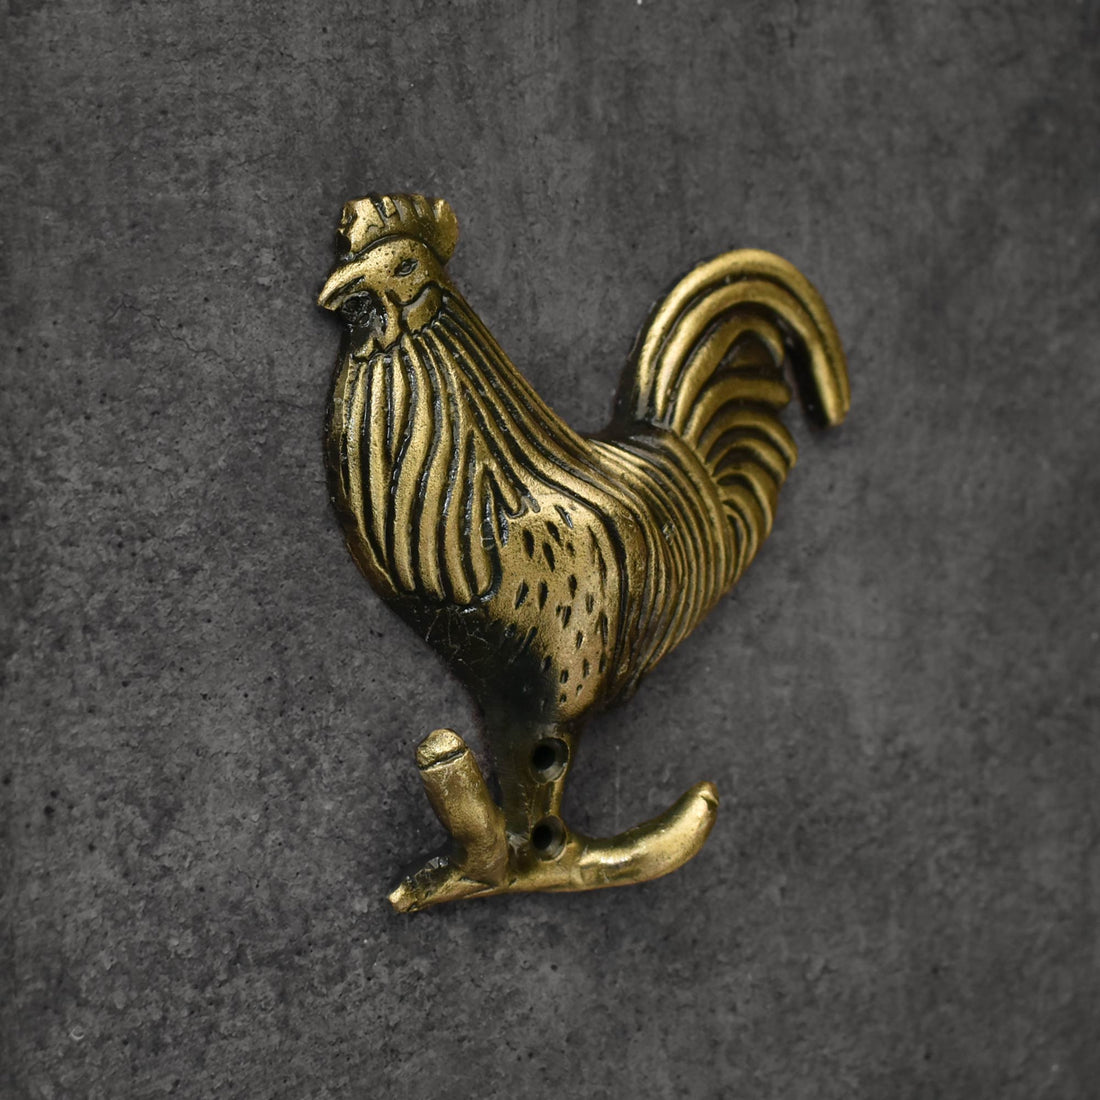 Cluckles Chicken Rooster Wall Hook and Hanger